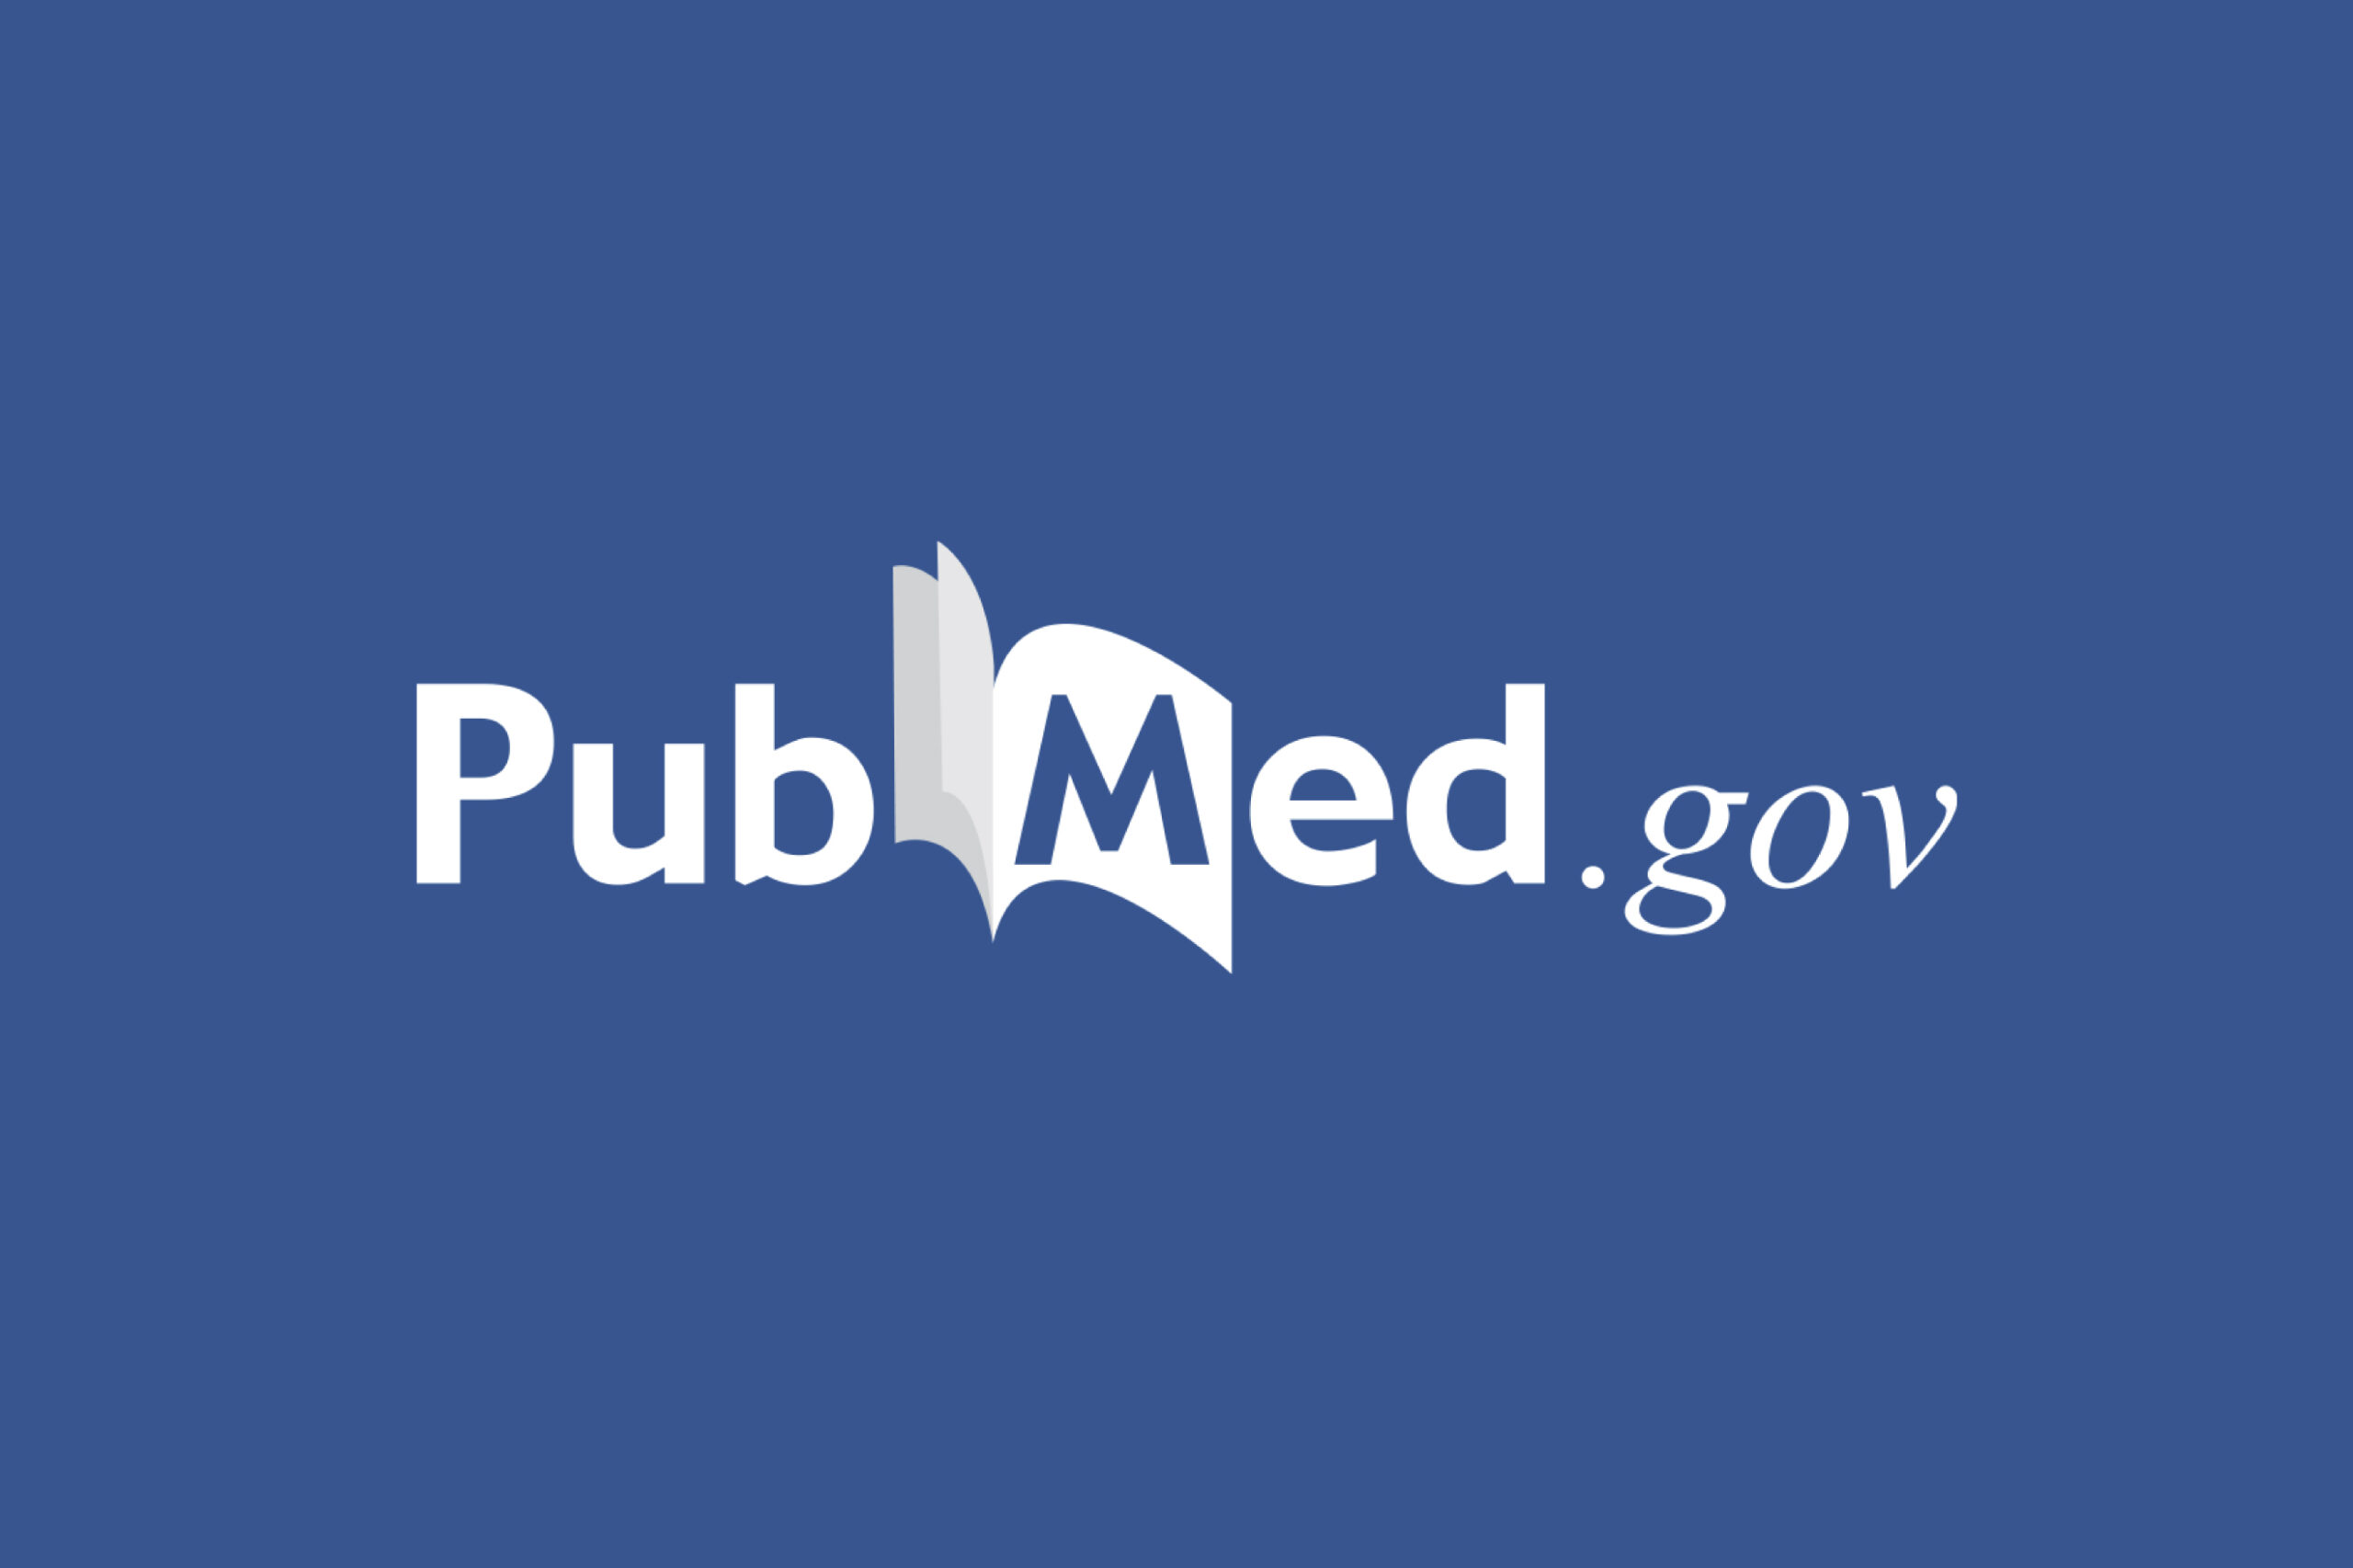 Introduction to PubMed